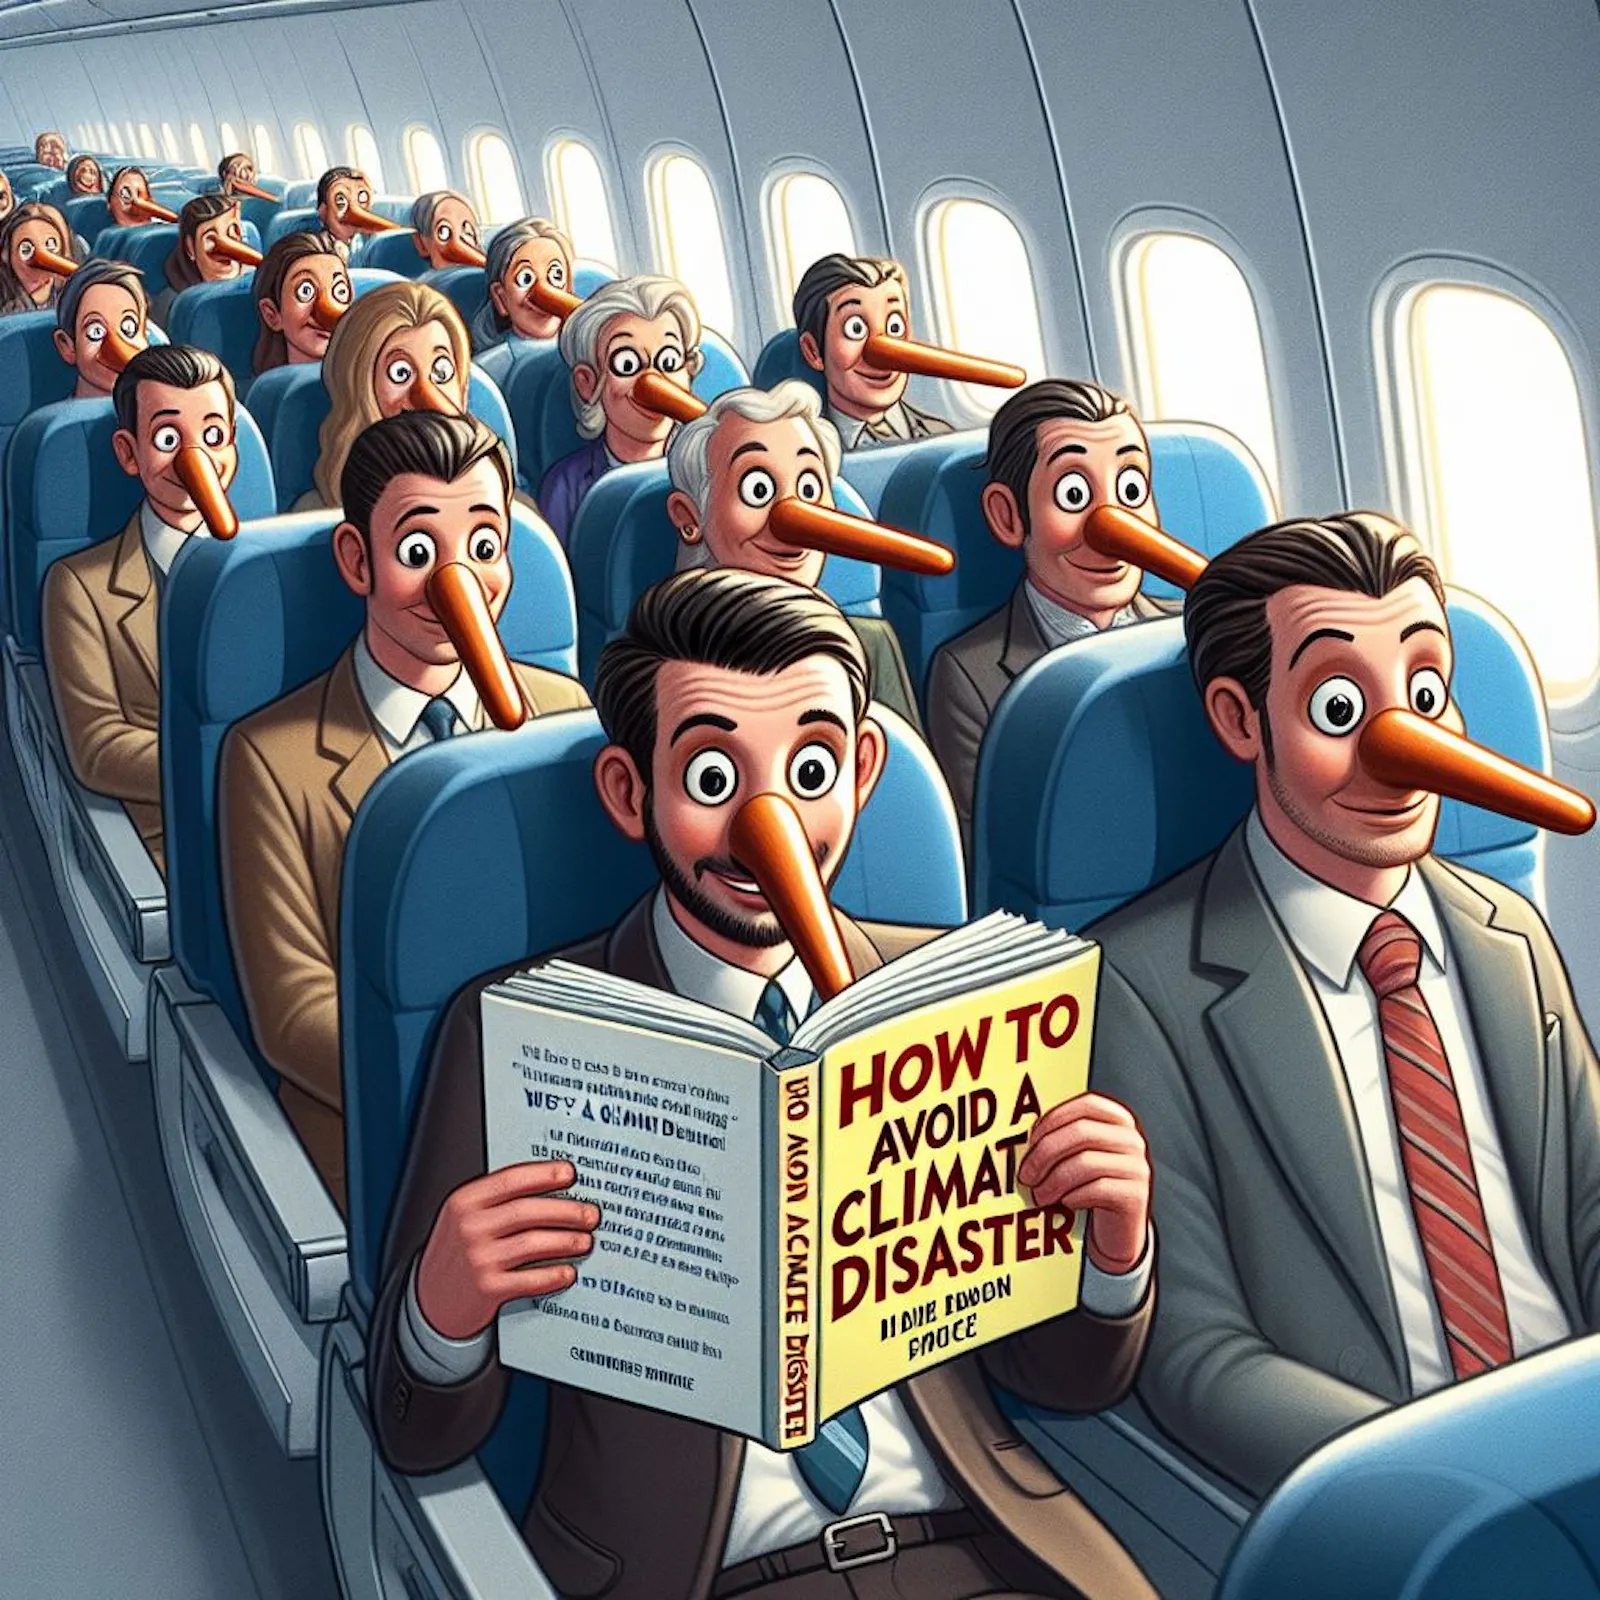 A text generated image depicting people travelling on a passenger jet aircraft. There is a conflict of interests between wanting to reduce air pollution and travelling on polluting jet aircraft. That's why the people that travel on jet aircraft and or work in the industry are typically air pollution and climate change apologists